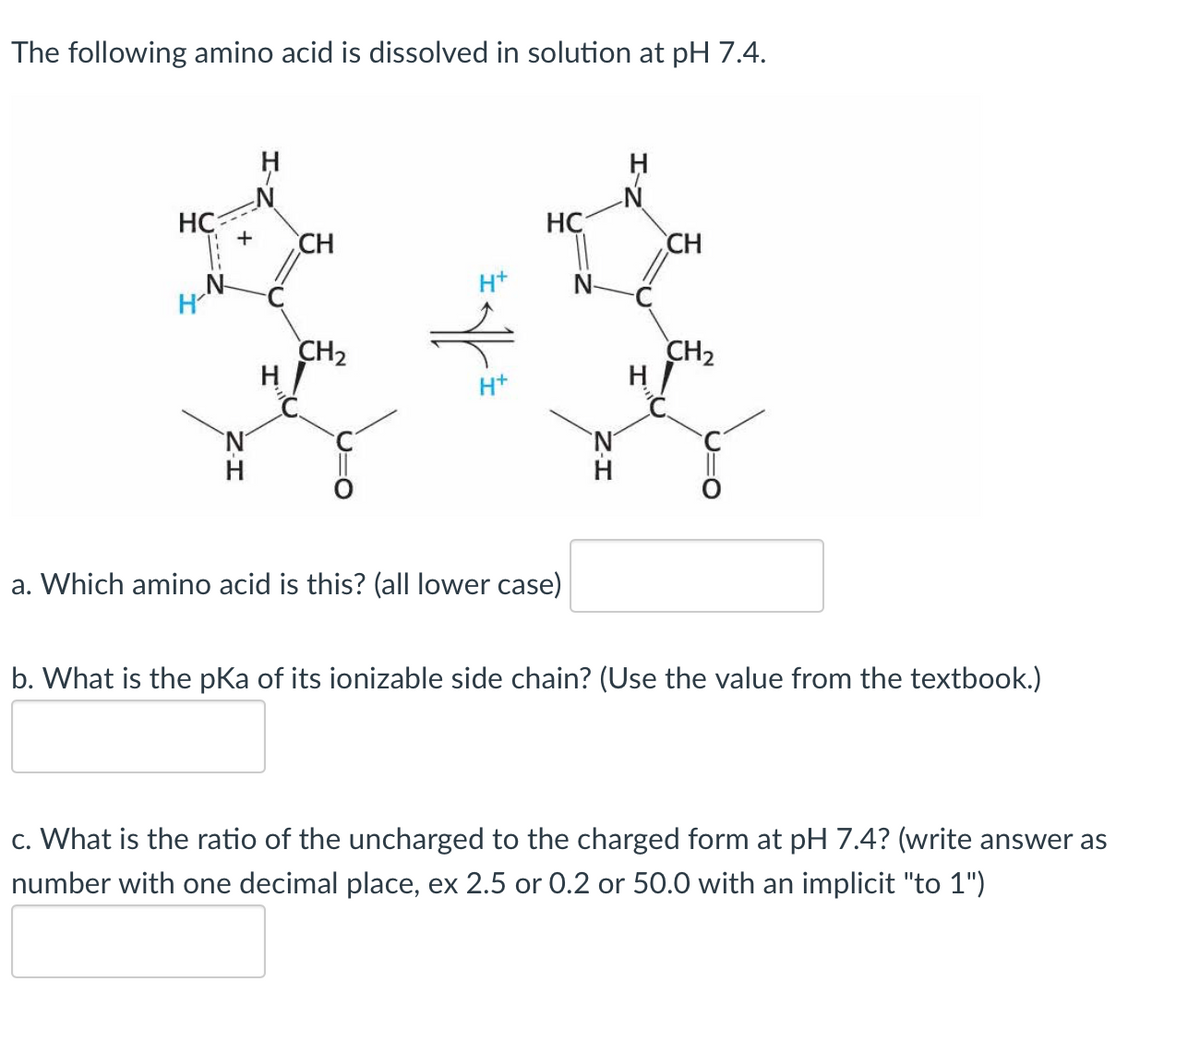 The following amino acid is dissolved in solution at pH 7.4.
HC
H'
+ CH
CH₂
H/
H+
HC
a. Which amino acid is this? (all lower case)
N-
H
CH
CH₂
b. What is the pKa of its ionizable side chain? (Use the value from the textbook.)
c. What is the ratio of the uncharged to the charged form at pH 7.4? (write answer as
number with one decimal place, ex 2.5 or 0.2 or 50.0 with an implicit "to 1")